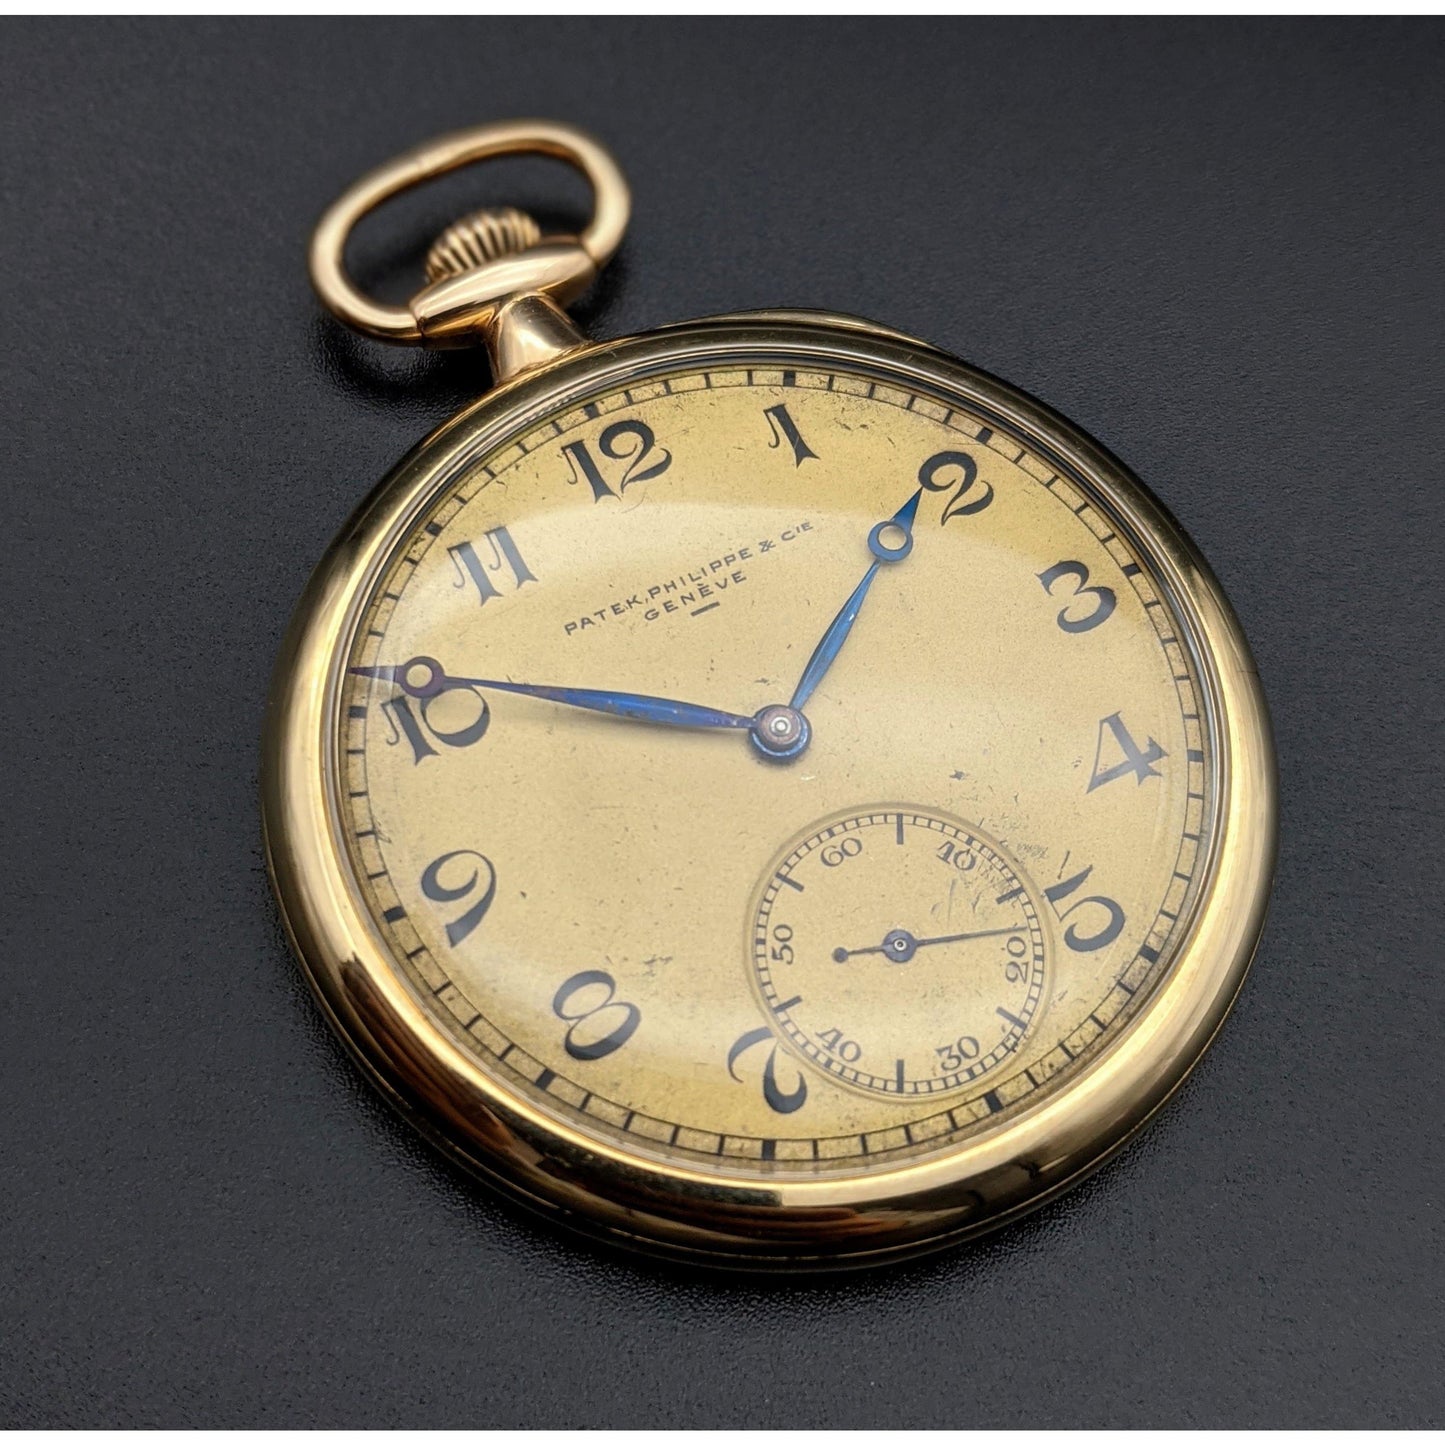 Patek Philippe 1924 unique Geneve Gold with Extract from  Patek Philippe Archives - E-V-W.com